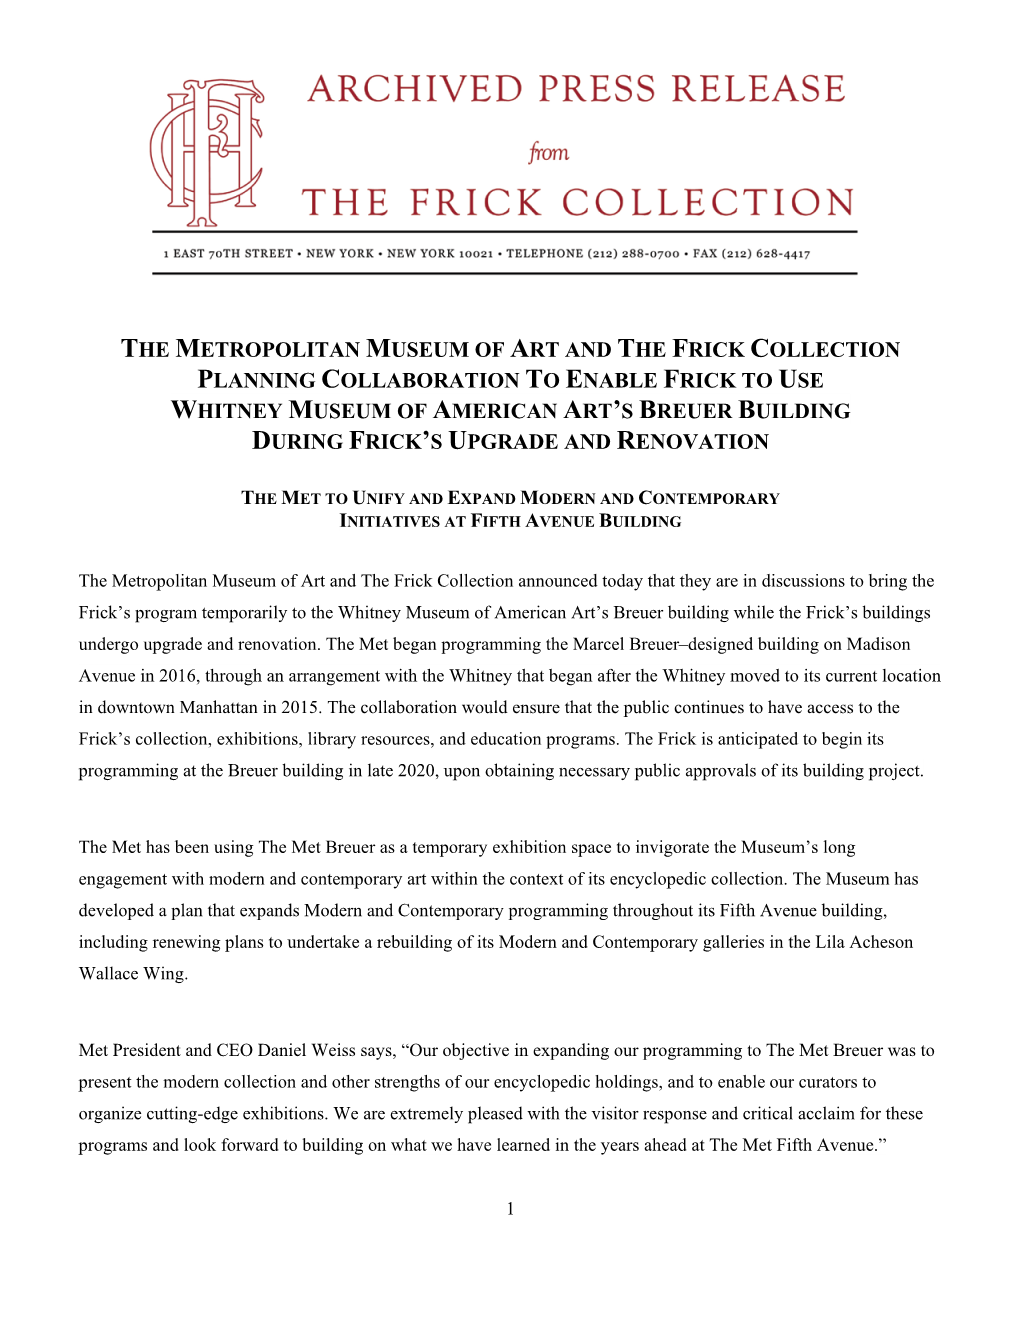 The Metropolitan Museum of Art and the Frick Collection